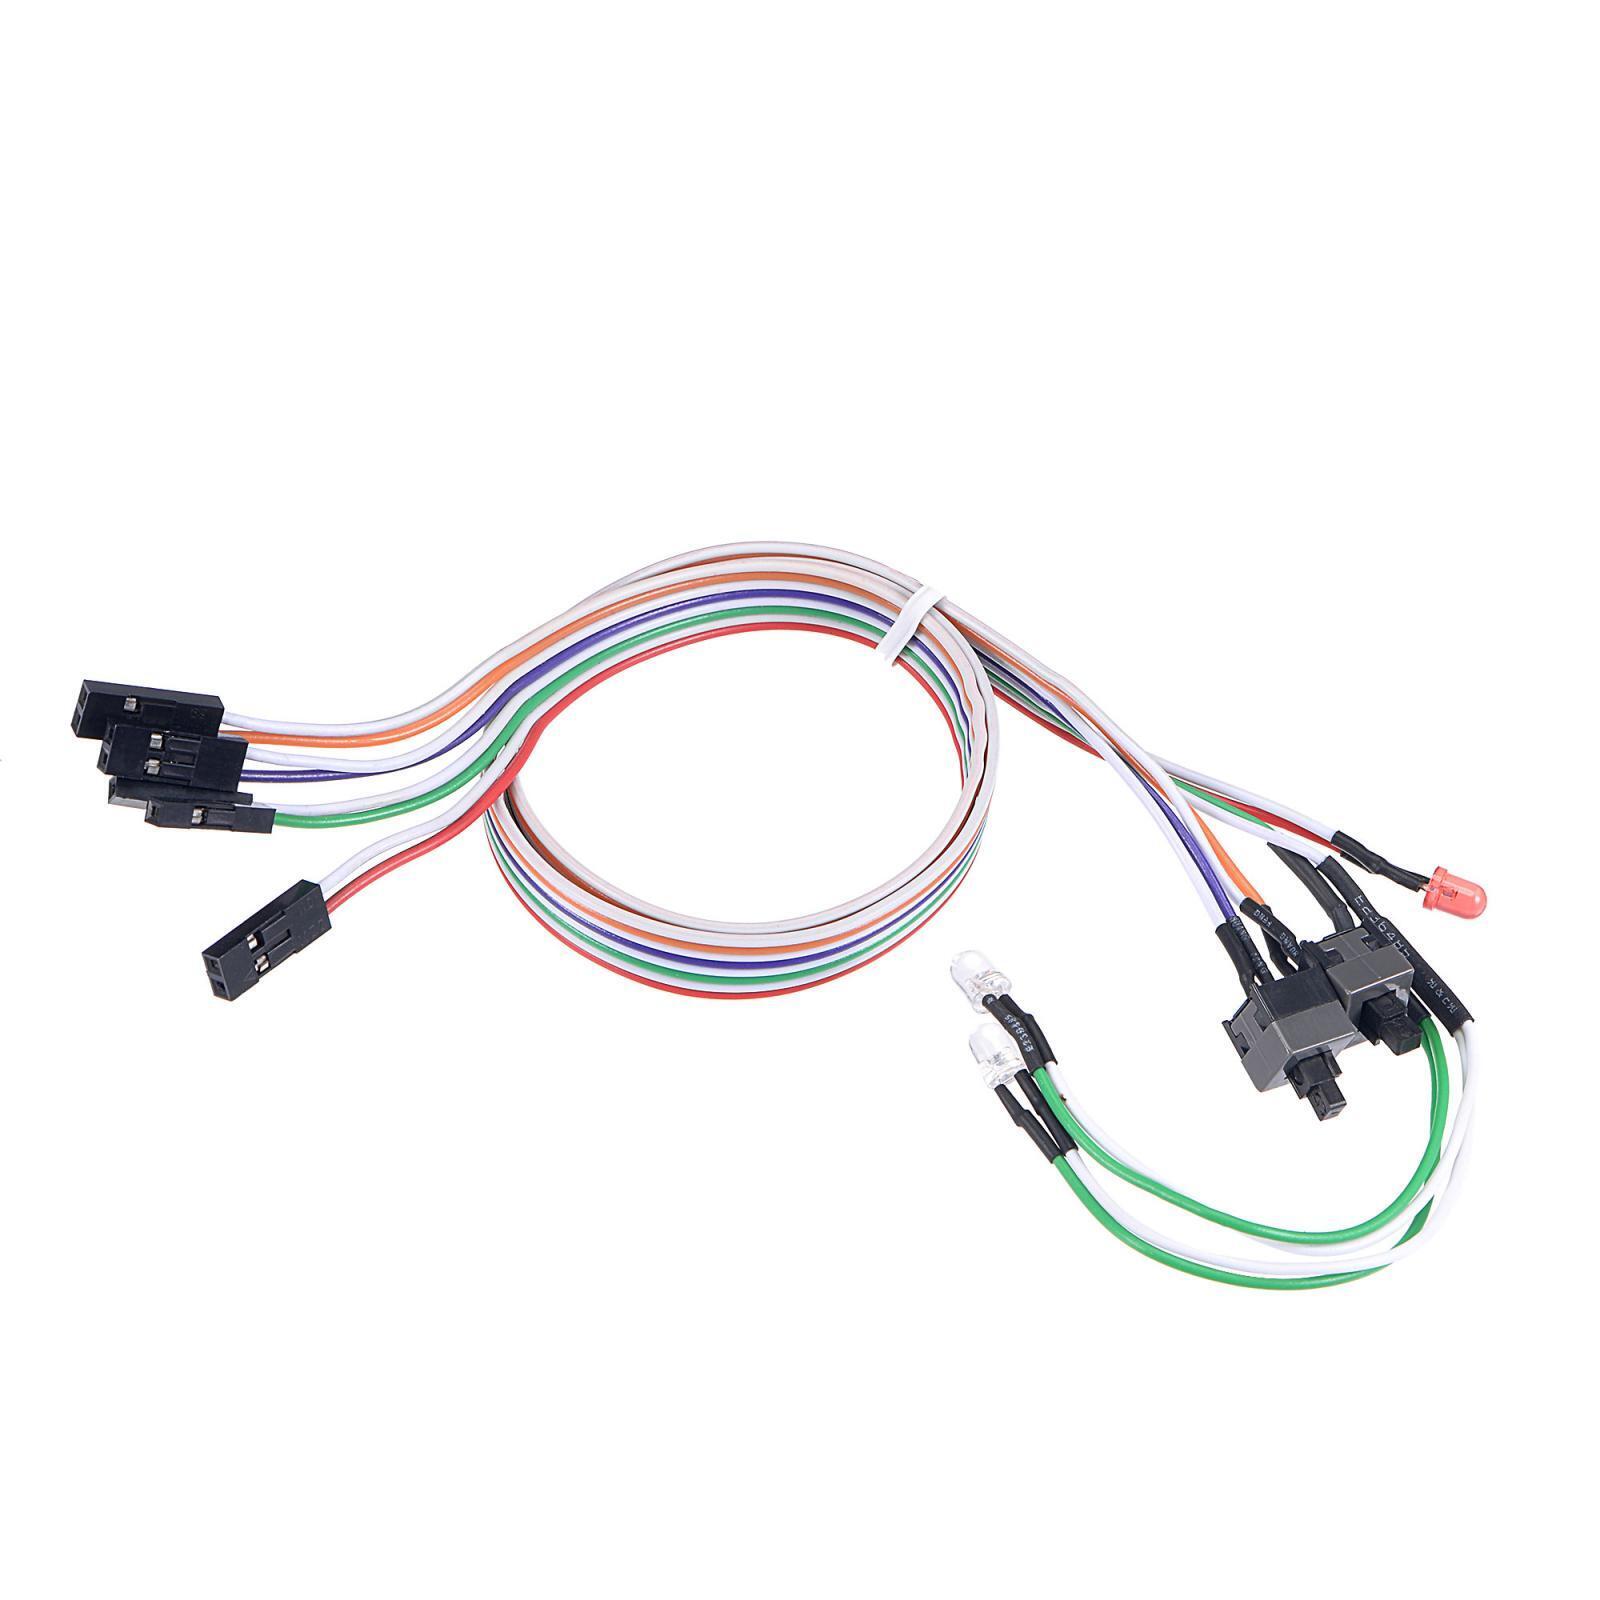 2 PIN SW Power Cable with 3 LED, 2 On Off Switch for ATX Computer 55cm 2pcs